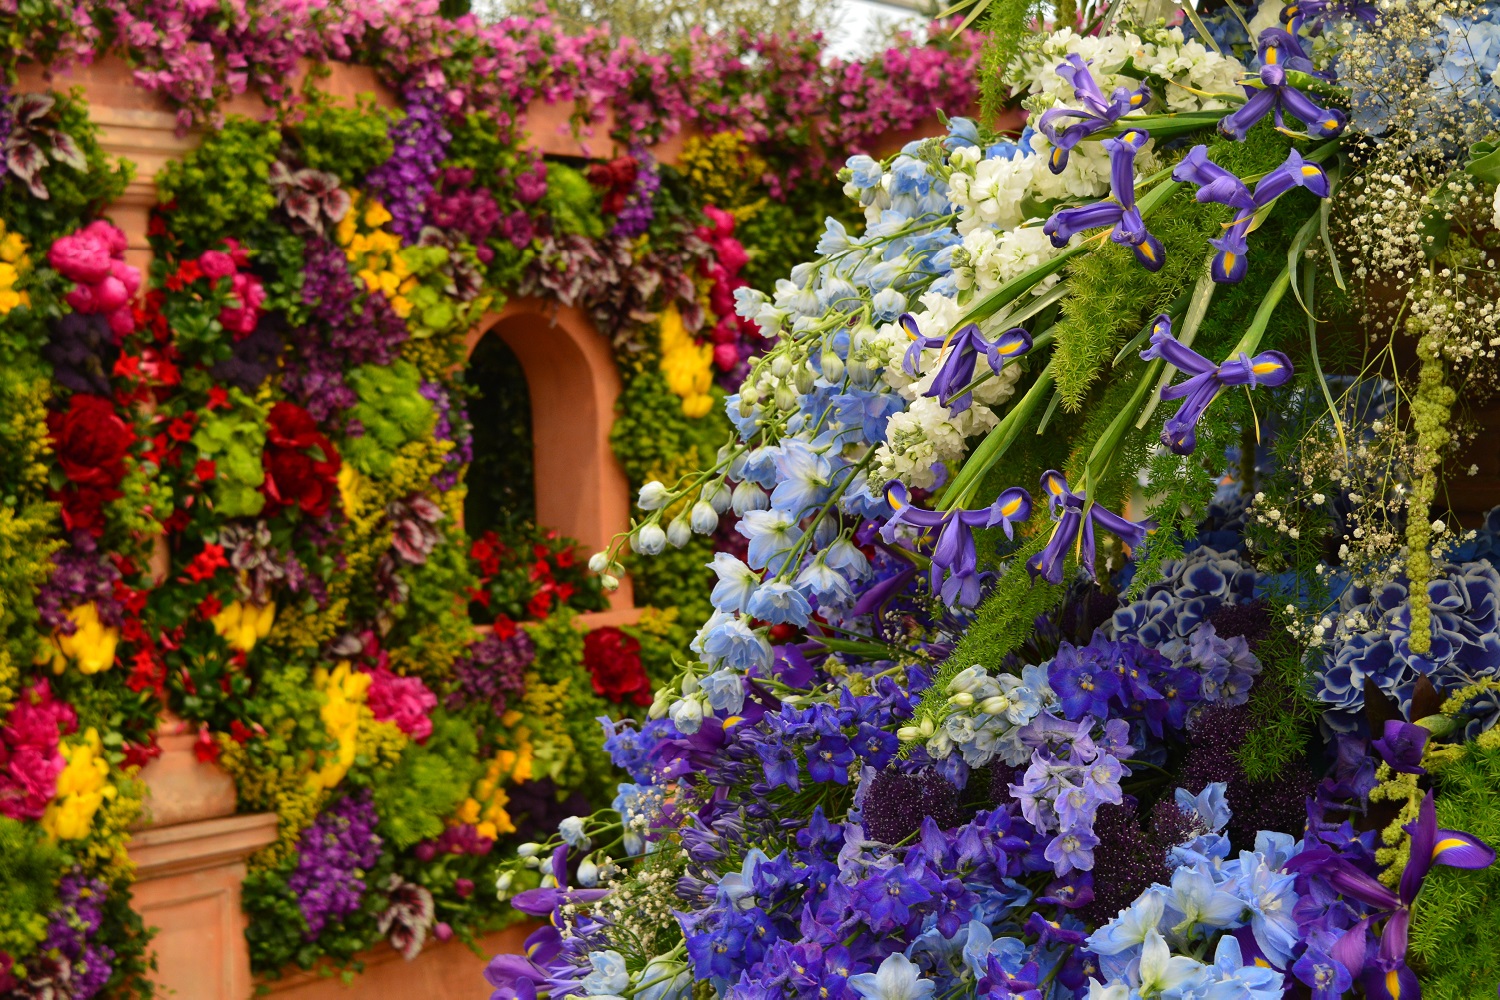 Events including chelsea flower show this spring